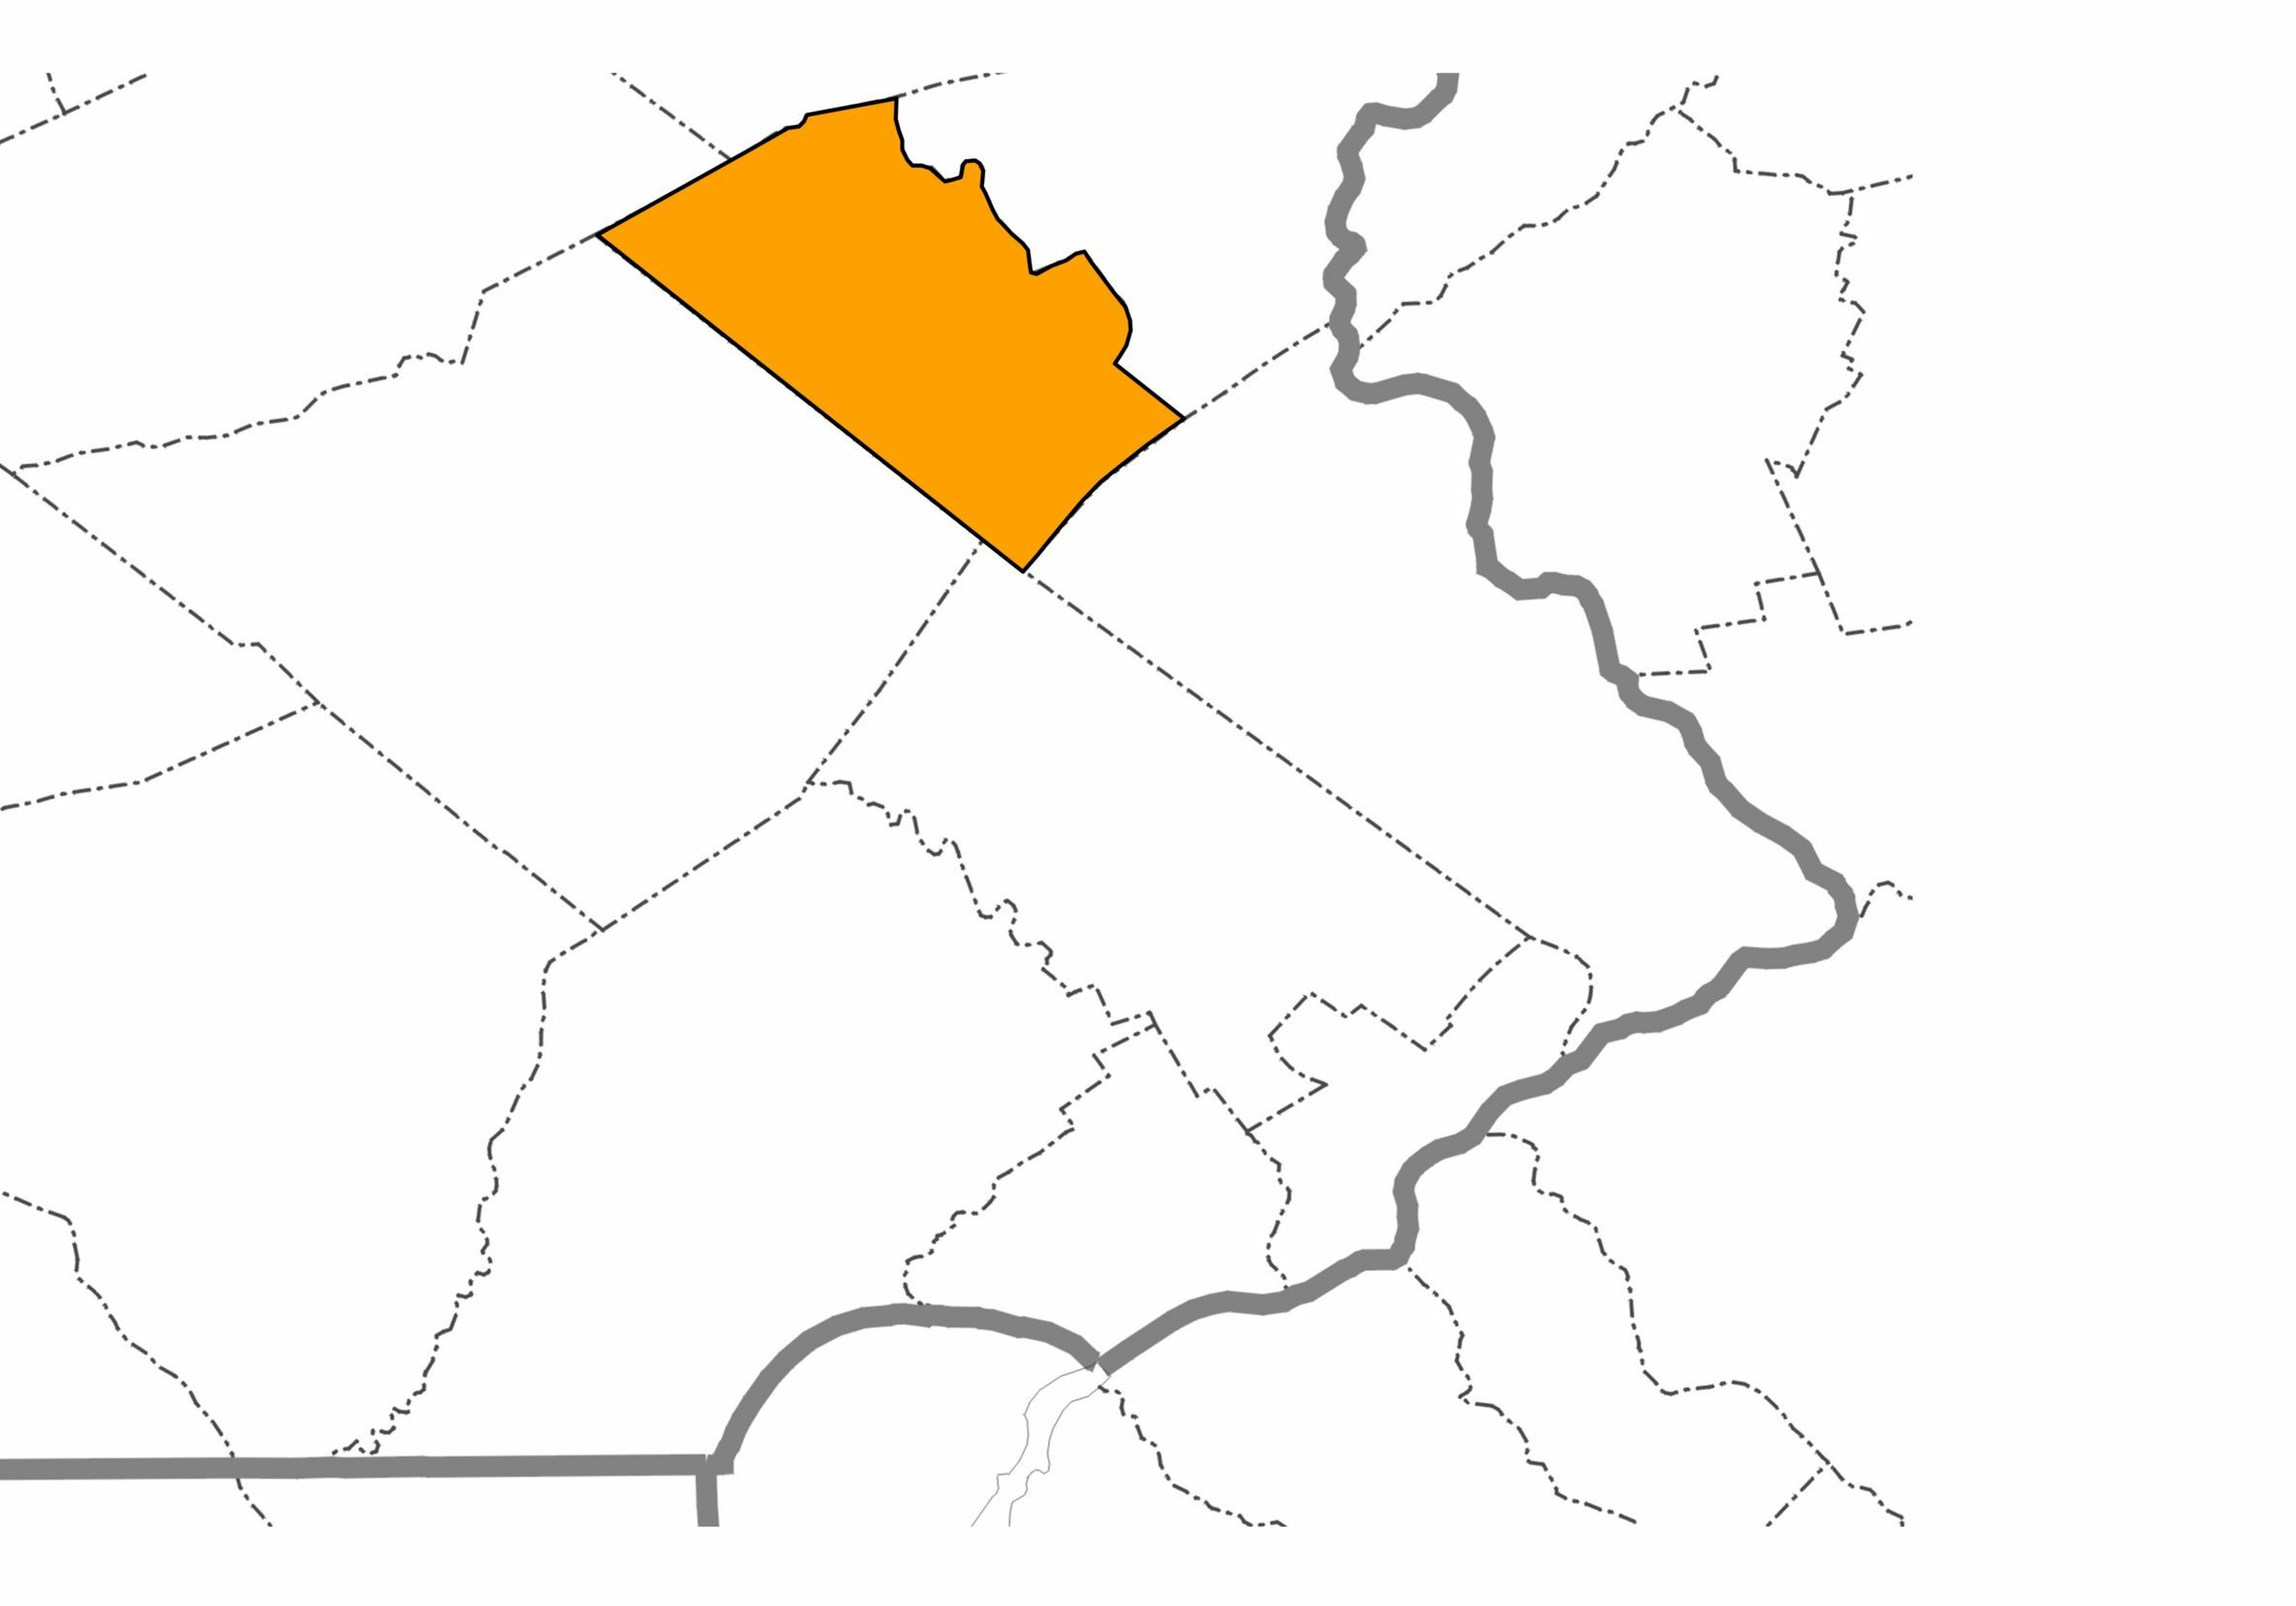 Lehigh County Highlighted on Local Map That Shows County Borders